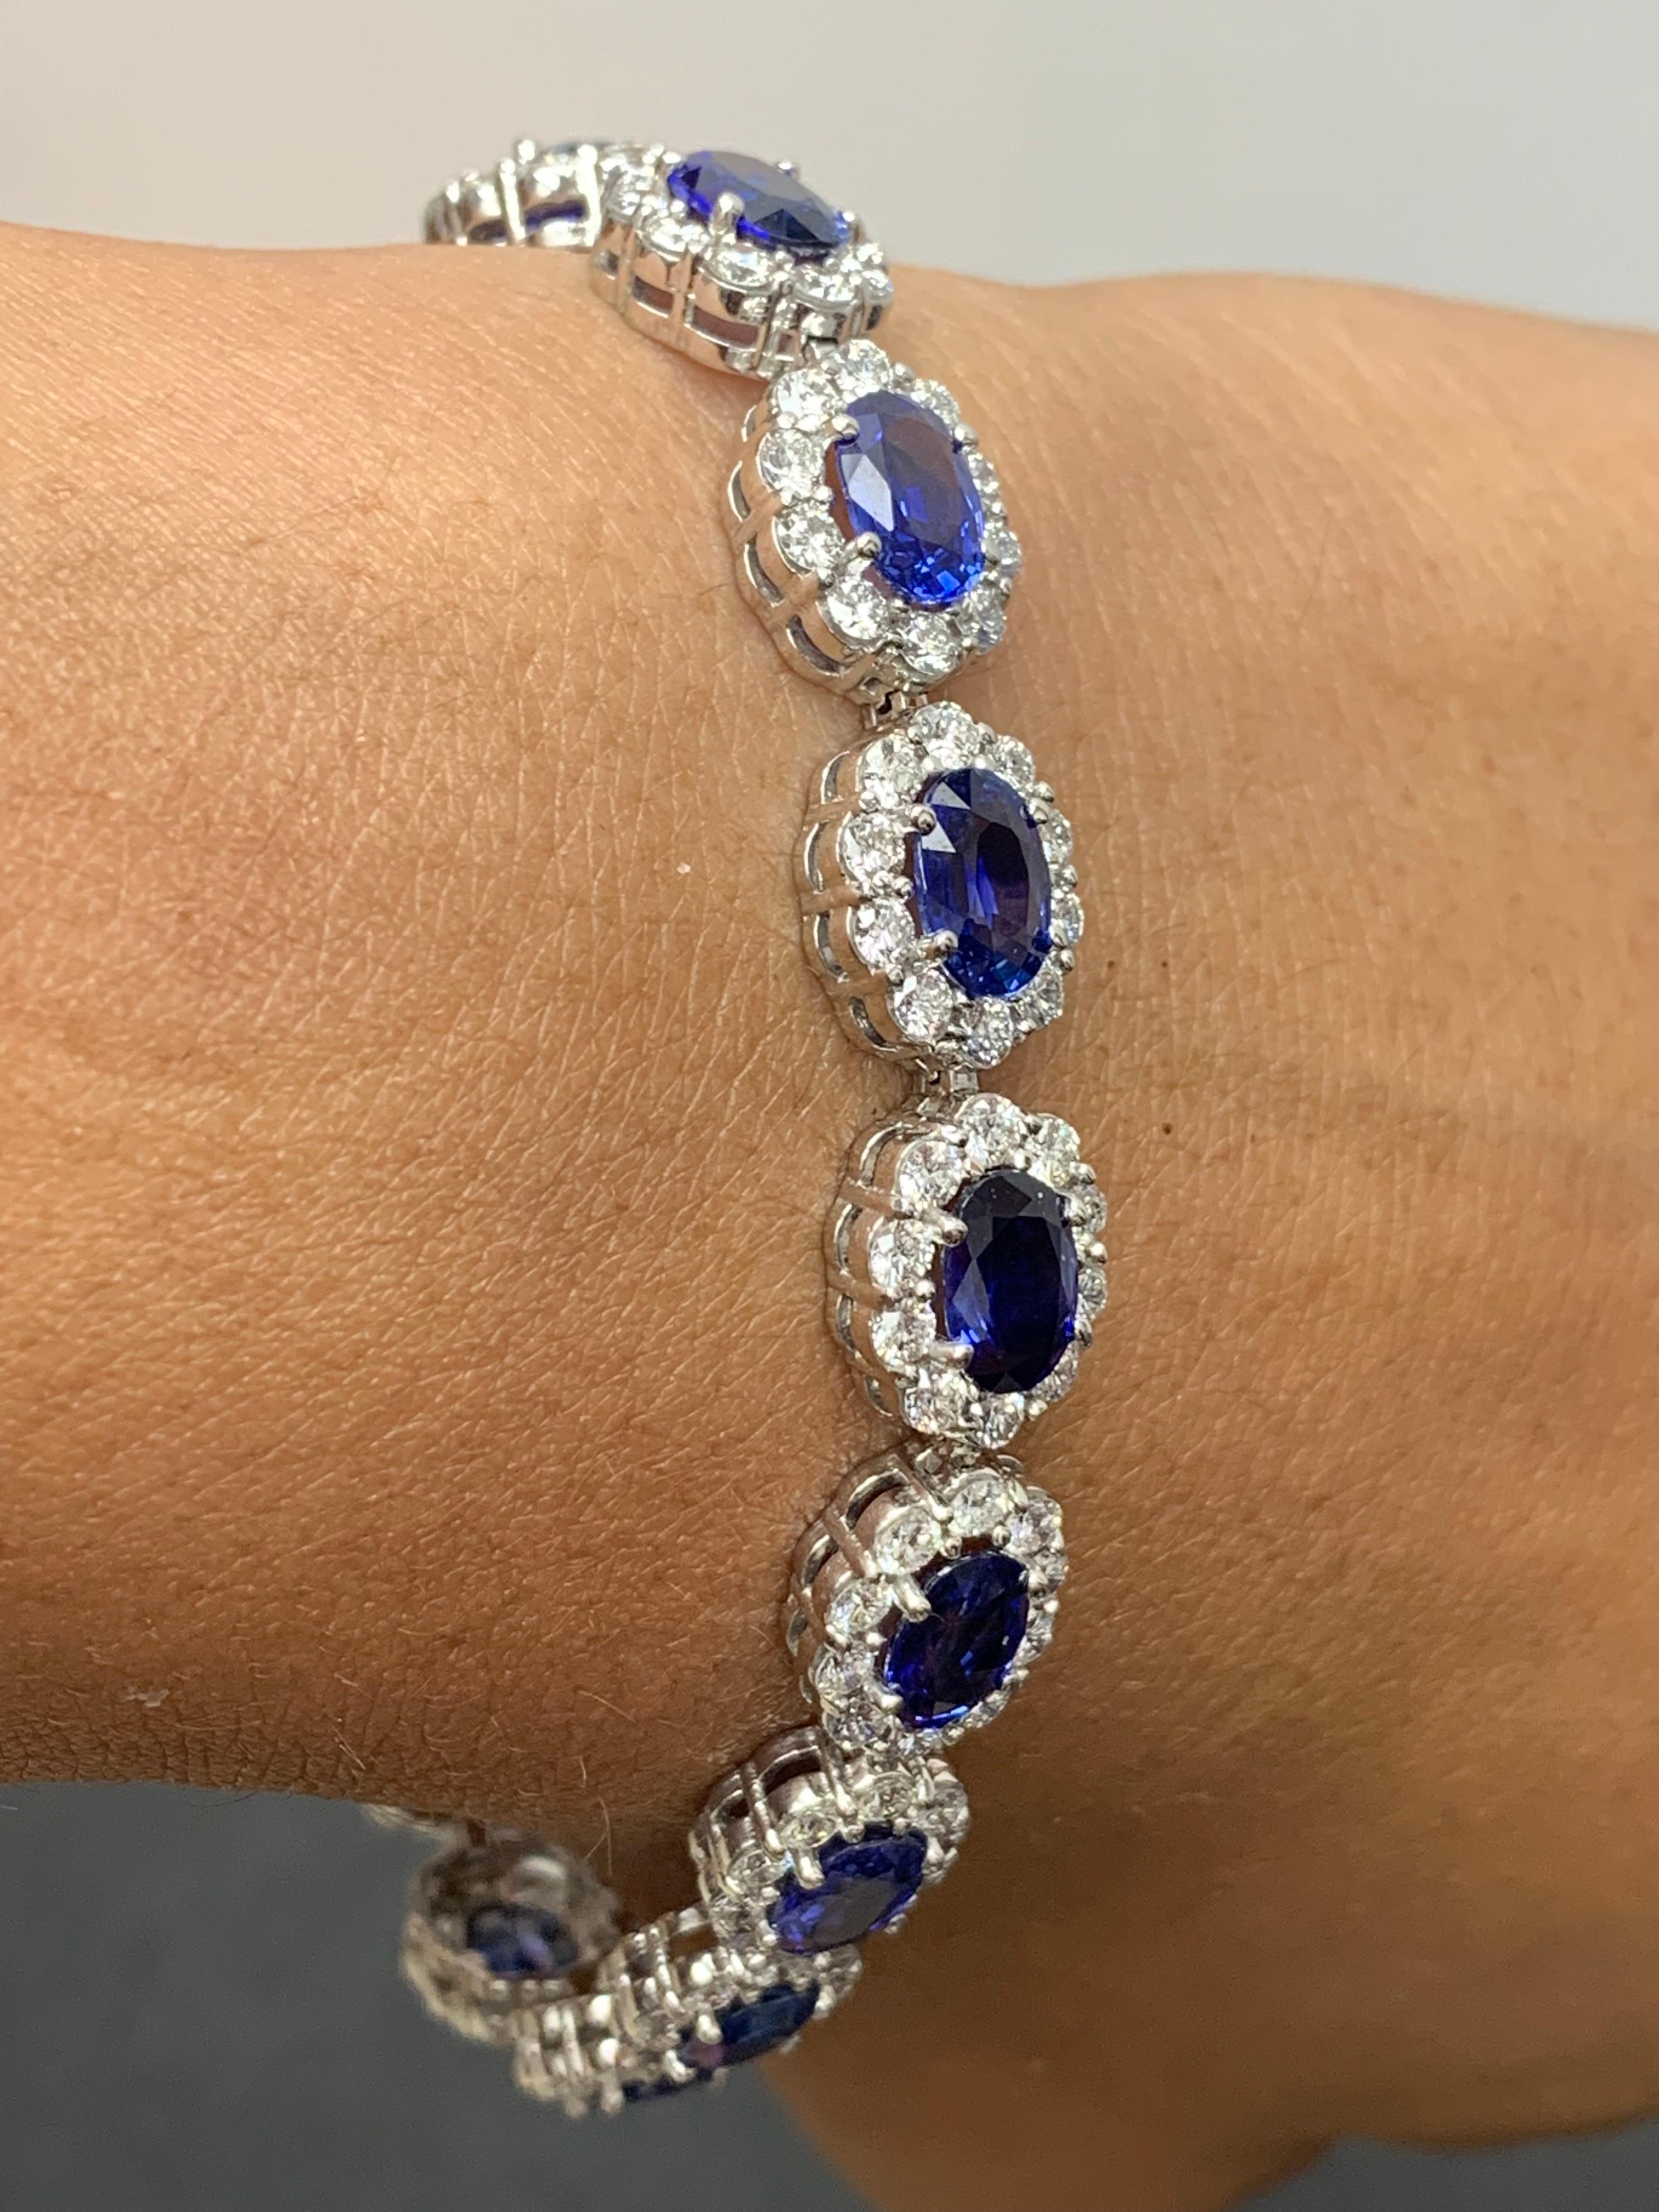 13.88 Carat Oval Cut Blue Sapphire and Diamond Halo Bracelet in 14K White Gold For Sale 1